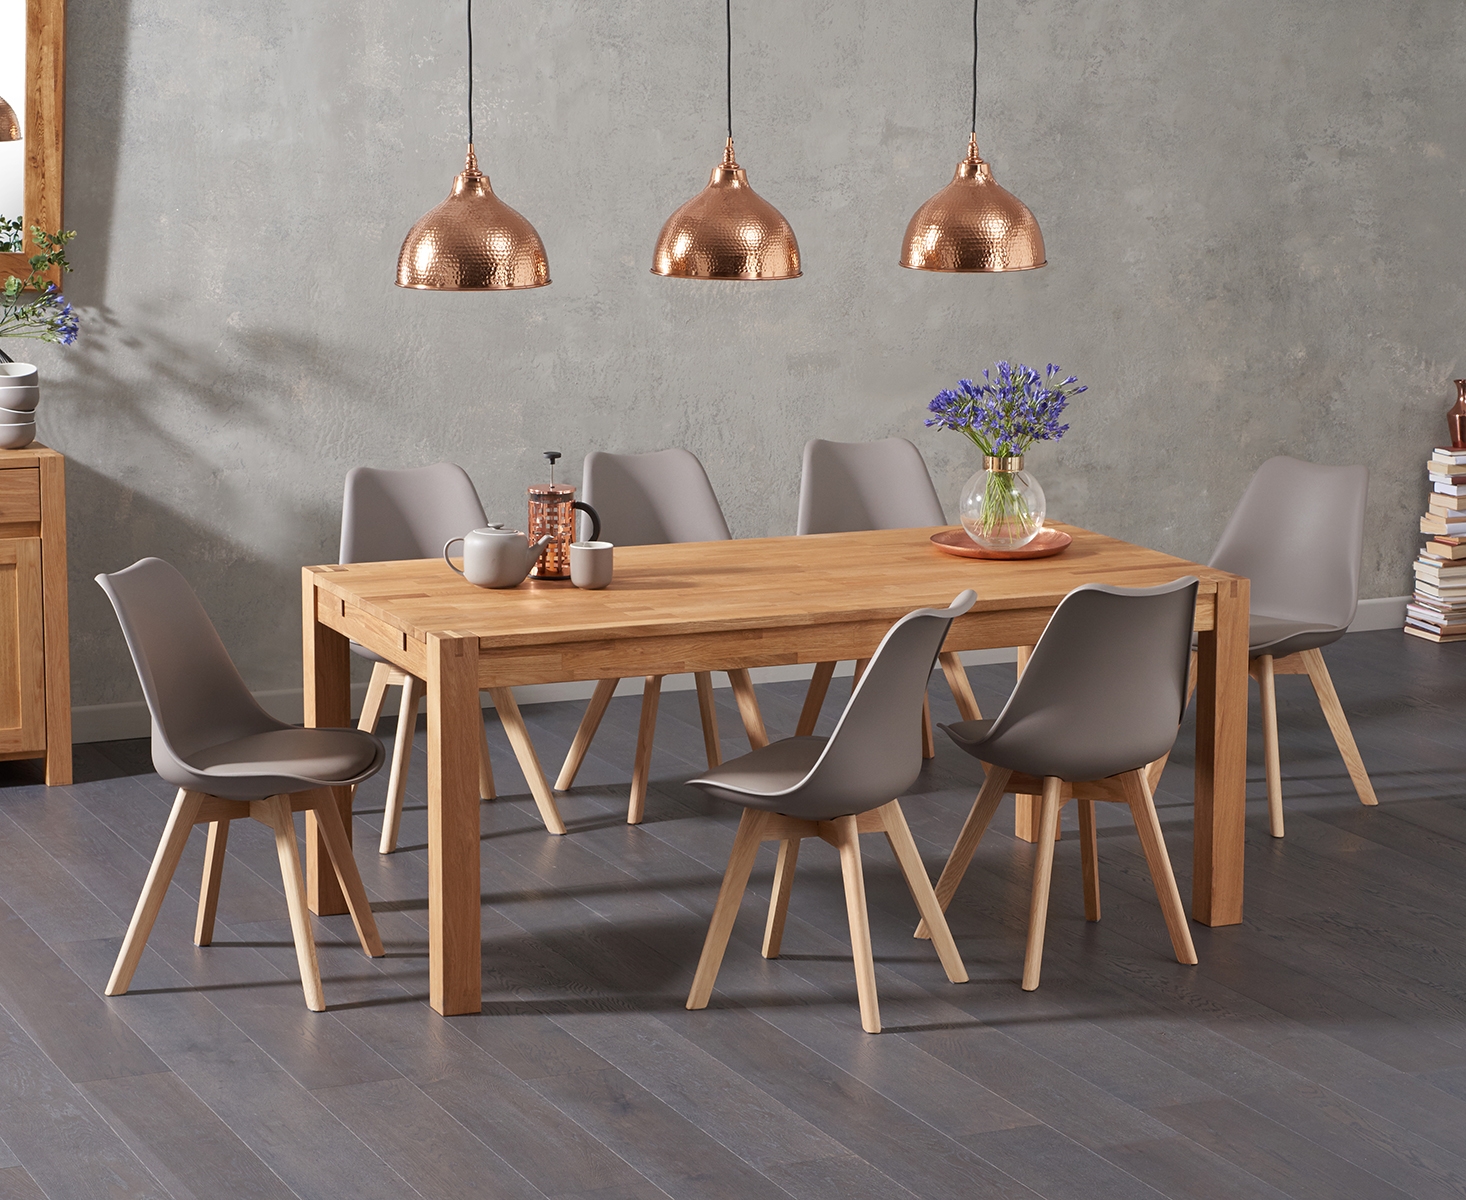 Verona 180cm Solid Oak Dining Table With 8 Dark Grey Orson Faux Leather Chairs